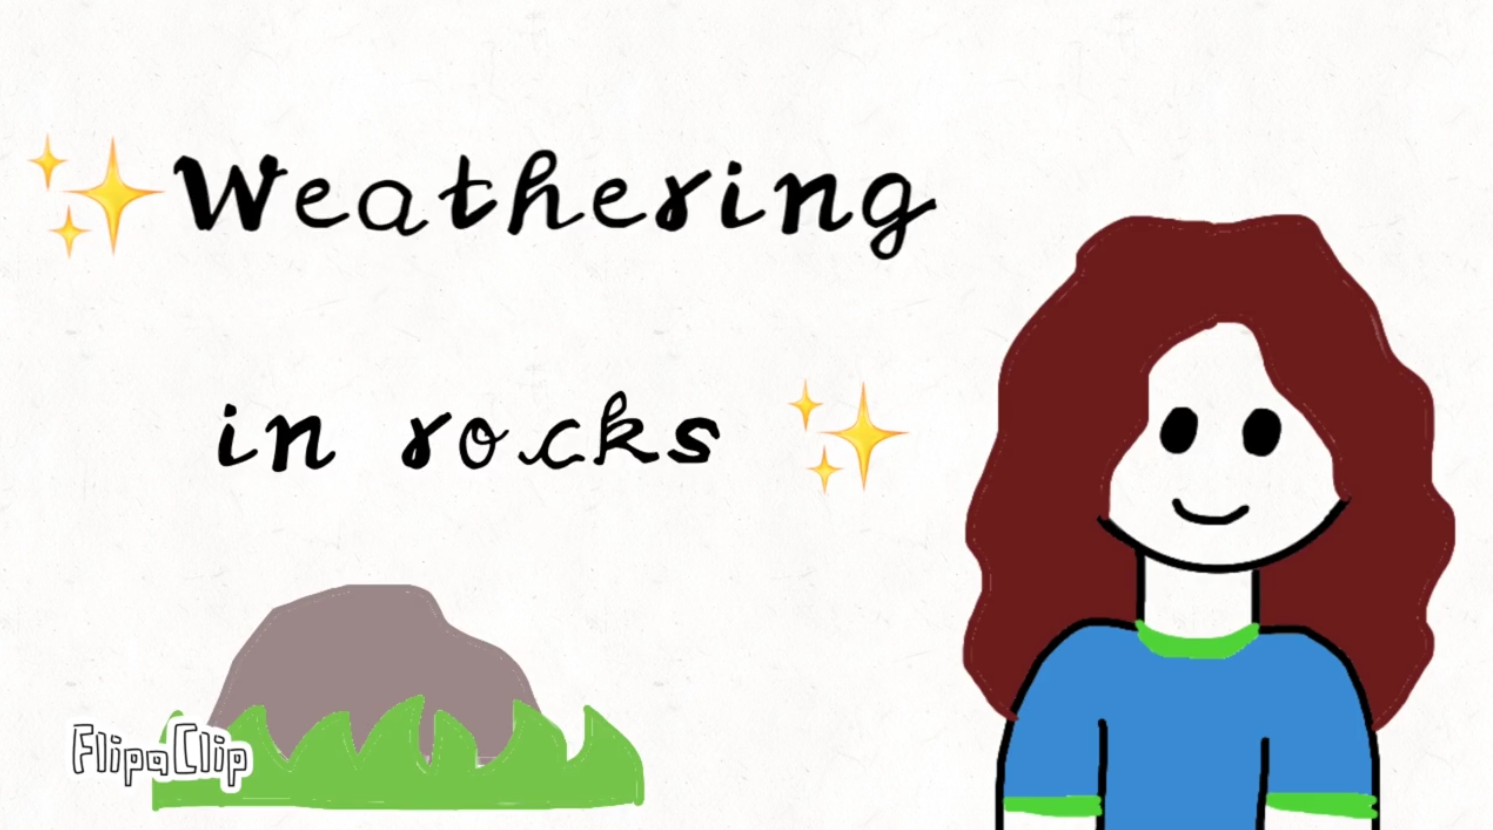 This experiment explores weathering in rocks and shows a fun demonstration on how to recreate it. 